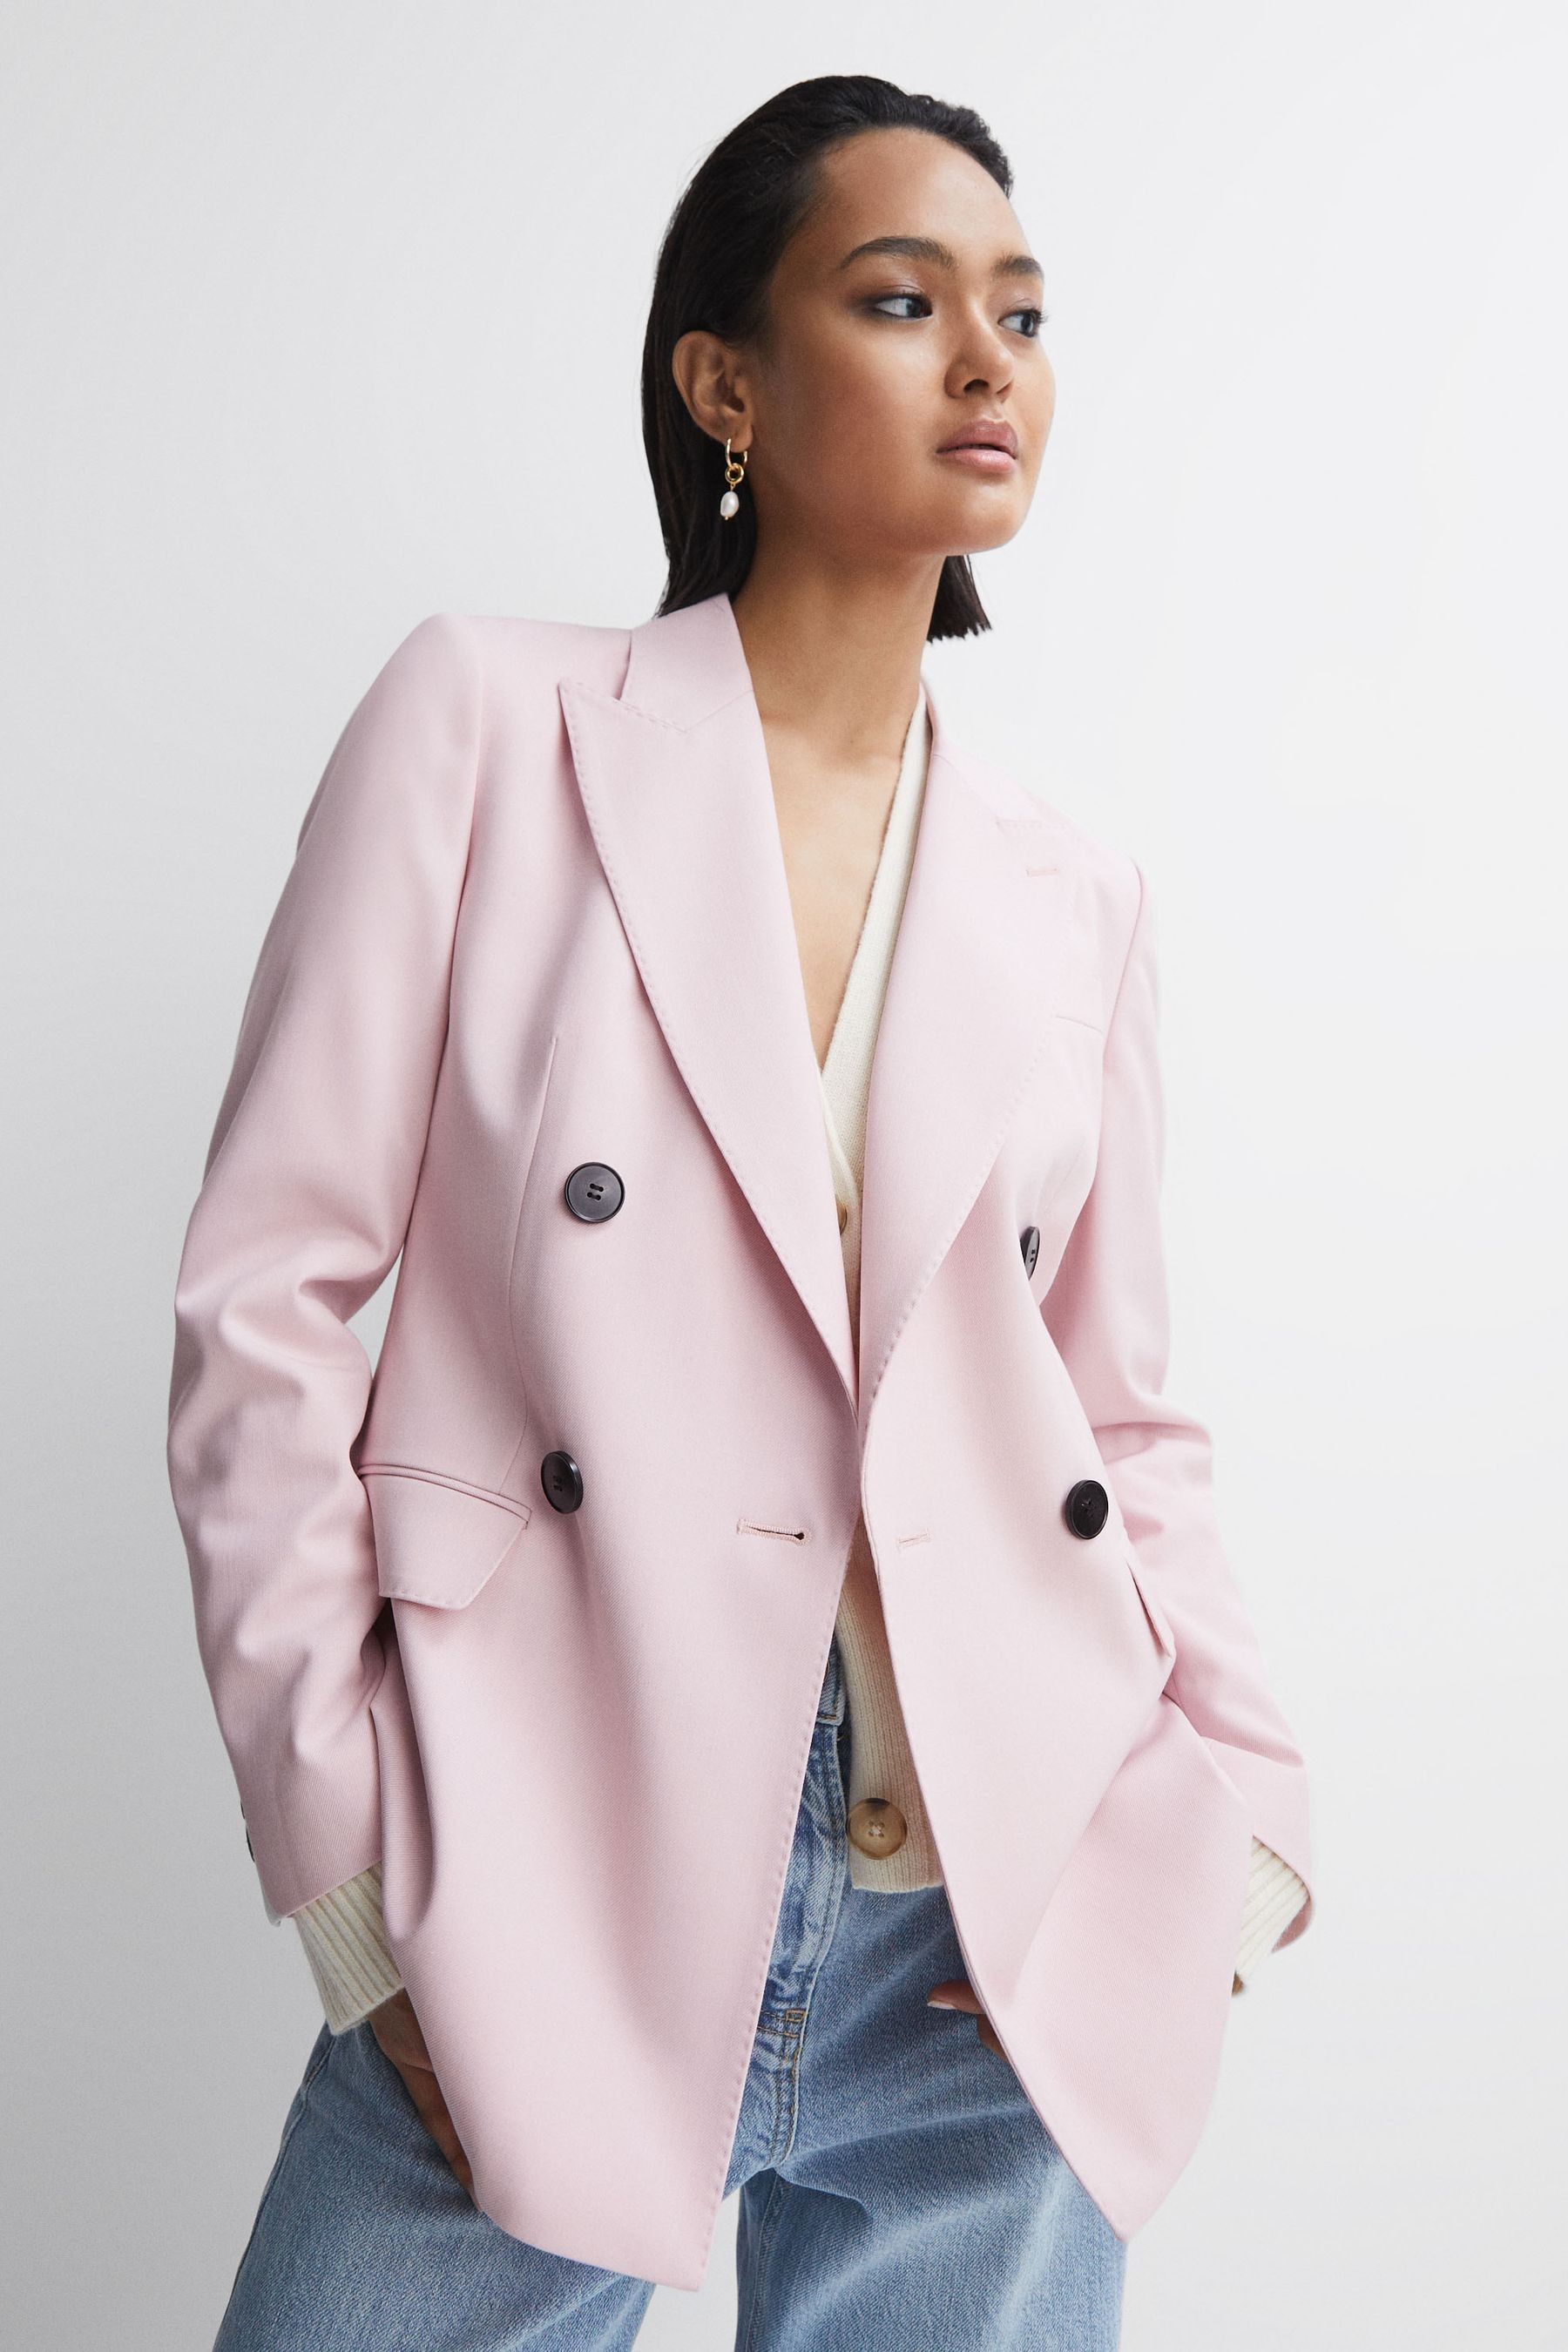 Reiss Evelyn - Pink Tailored Wool Blend Double Breasted Blazer, Us 12